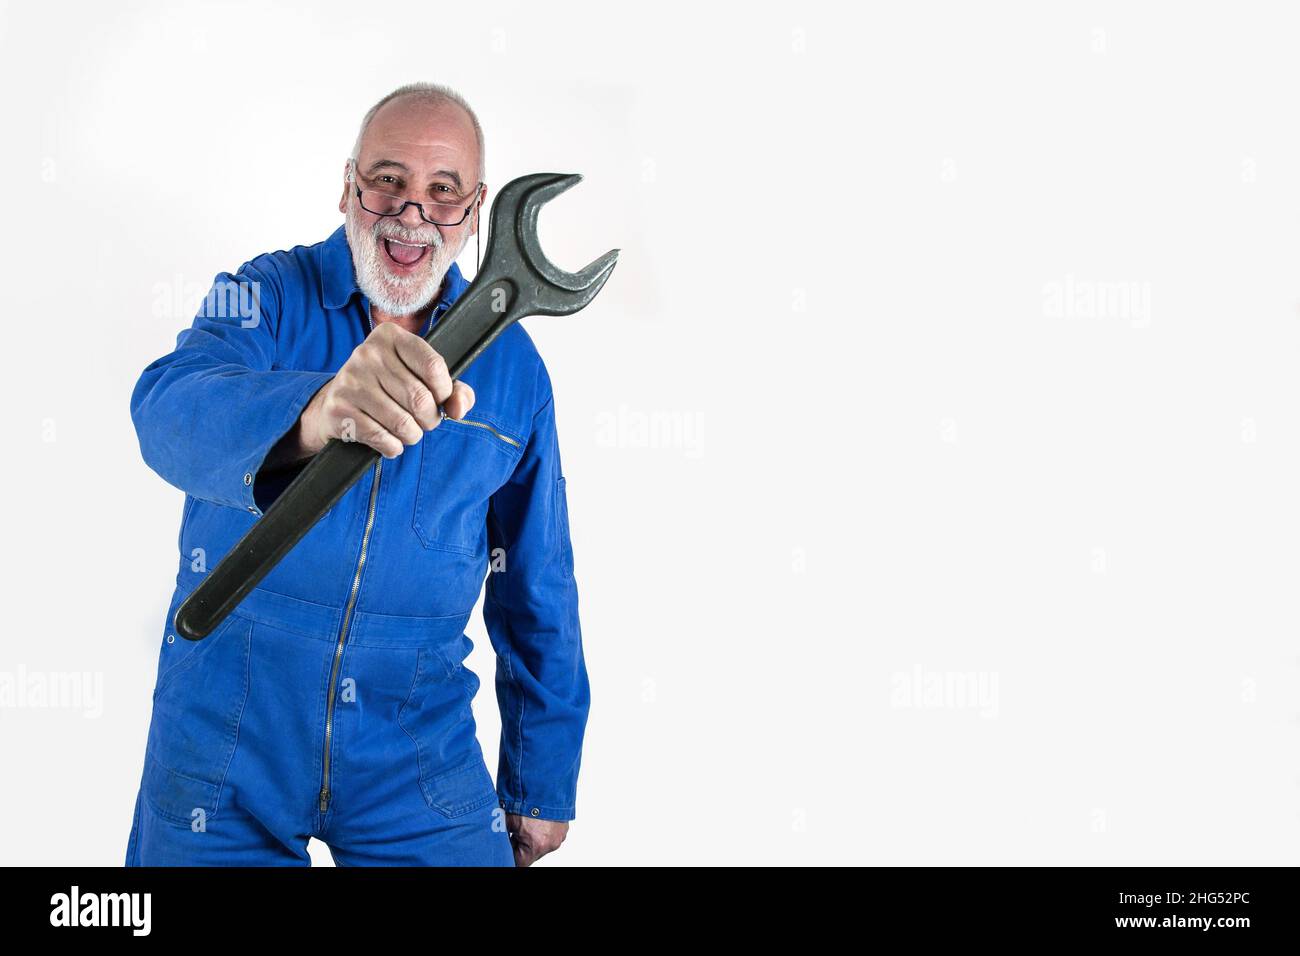 Funny, dynamic senior craftsman with great experience holds a giant open-end wrench in his hand. Stock Photo